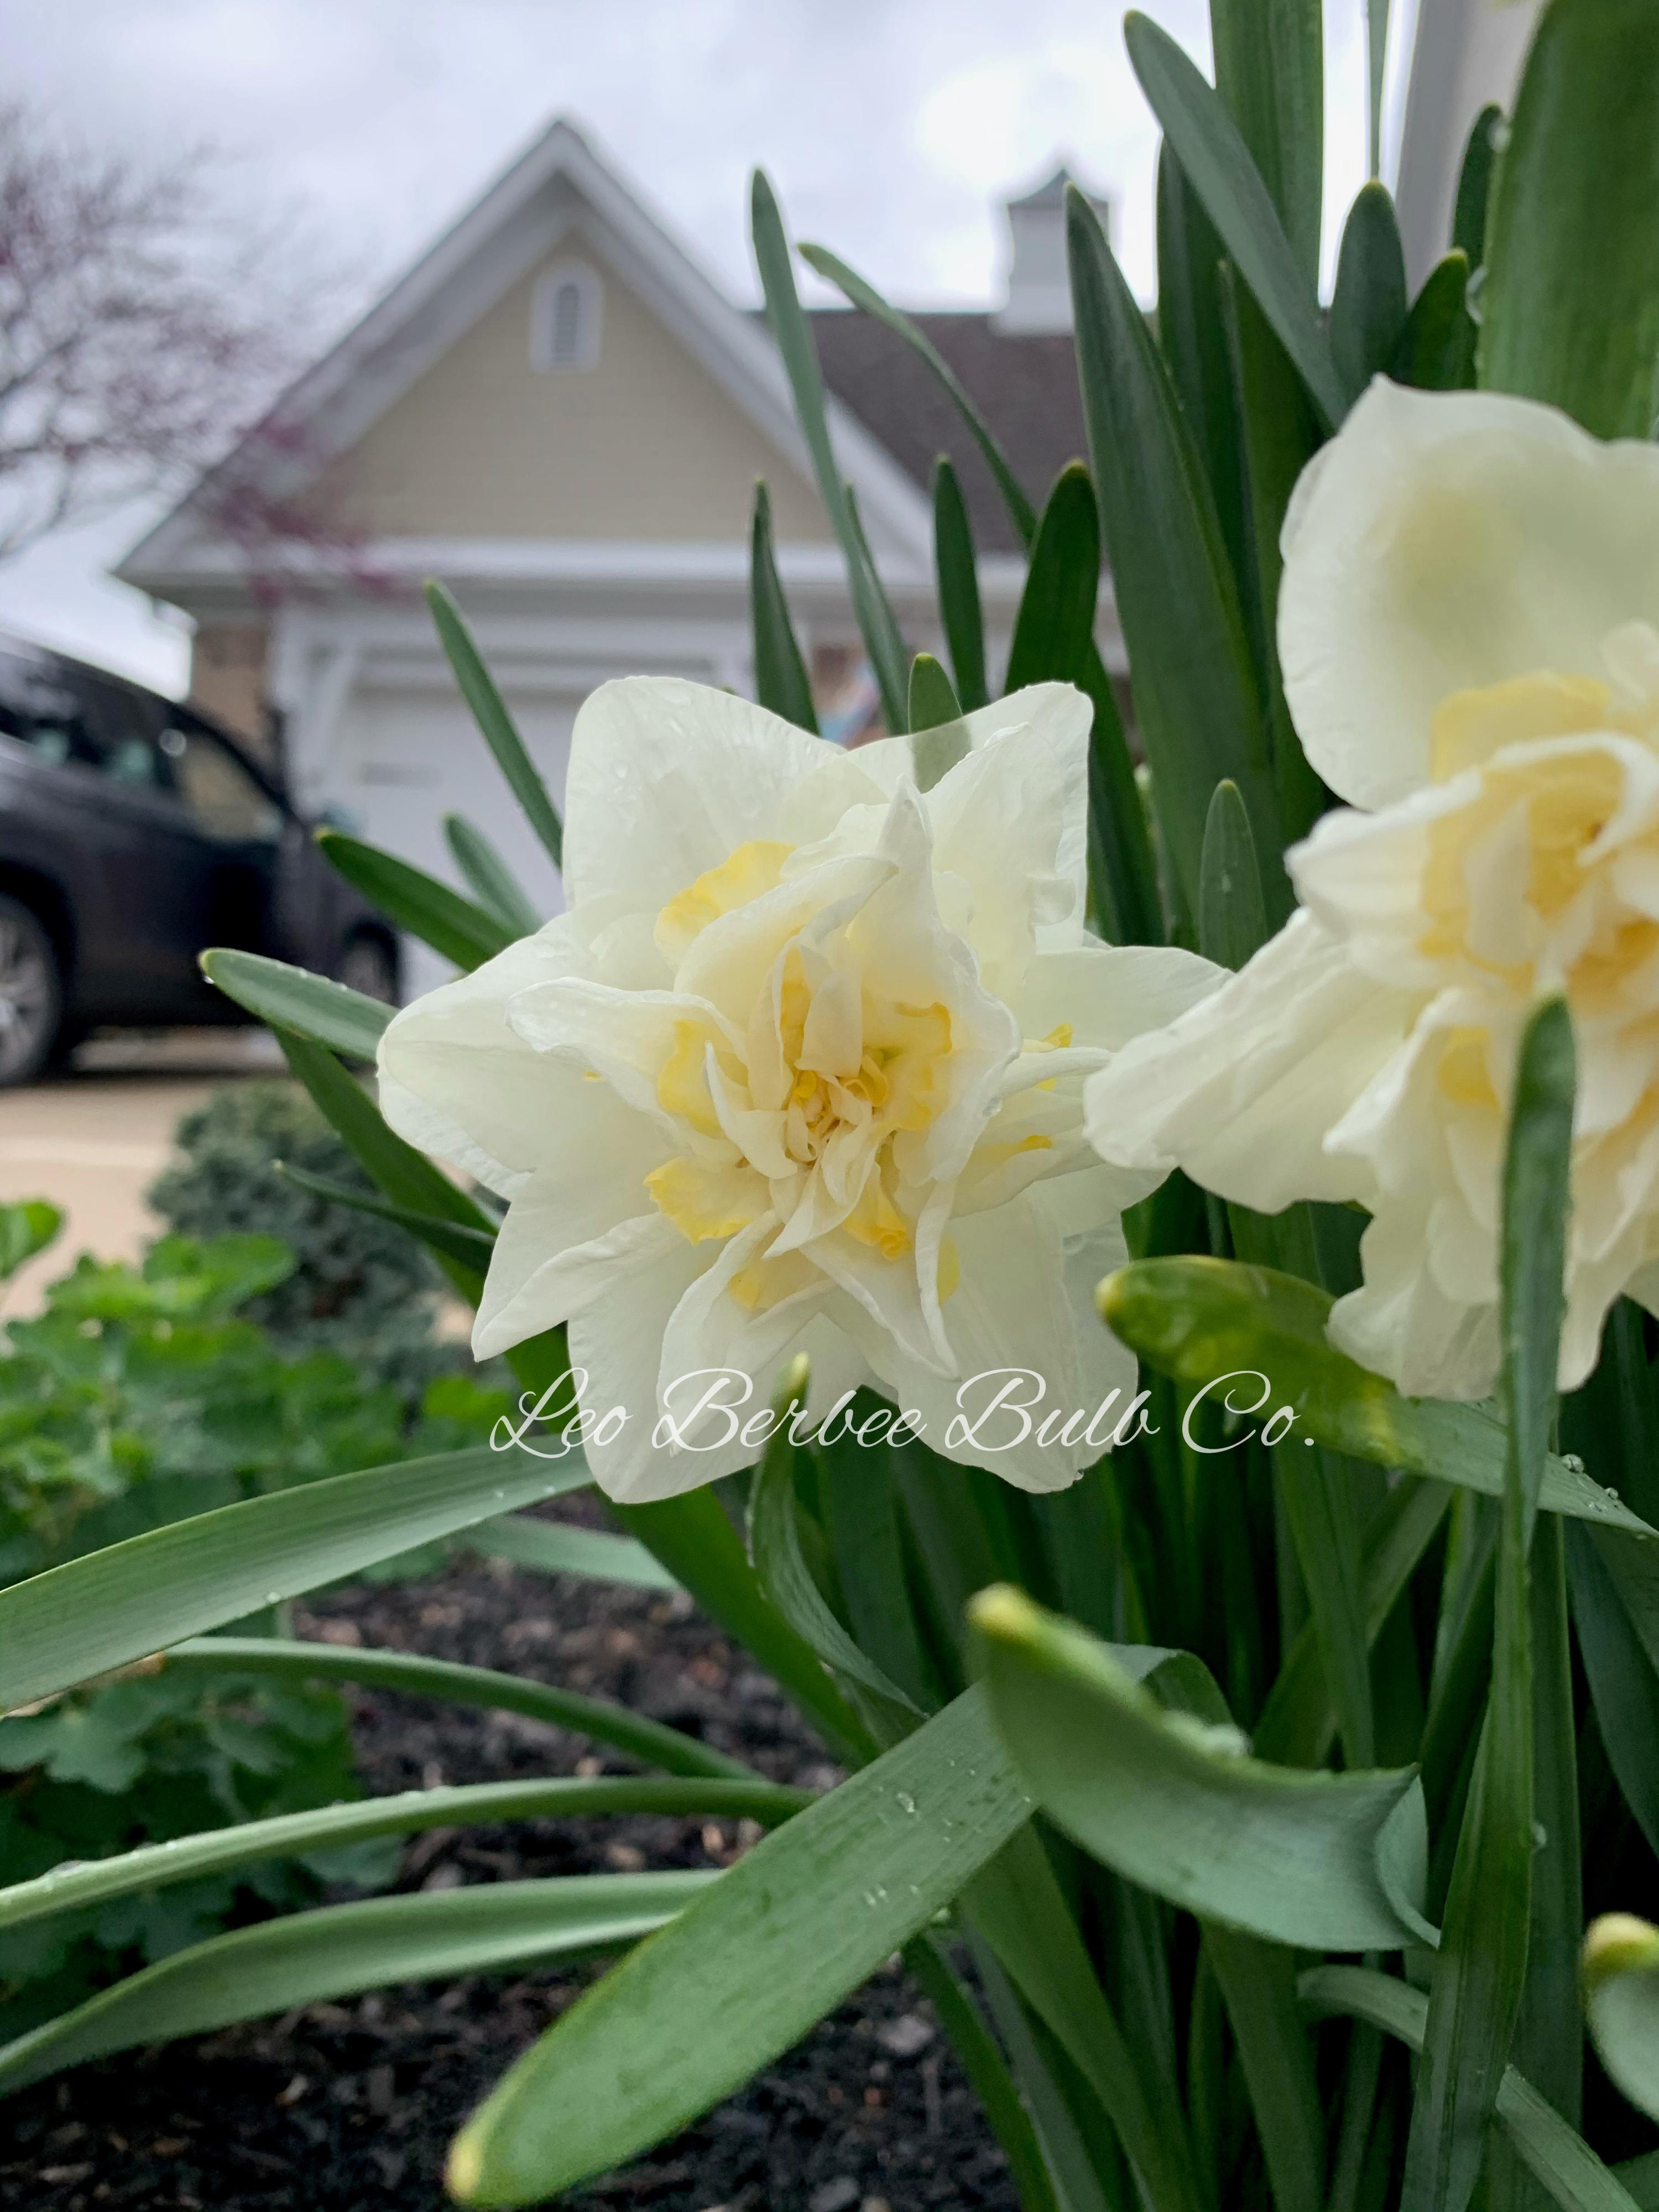 Daffodil Double 'White Lion' - from Leo Berbee Bulb Company